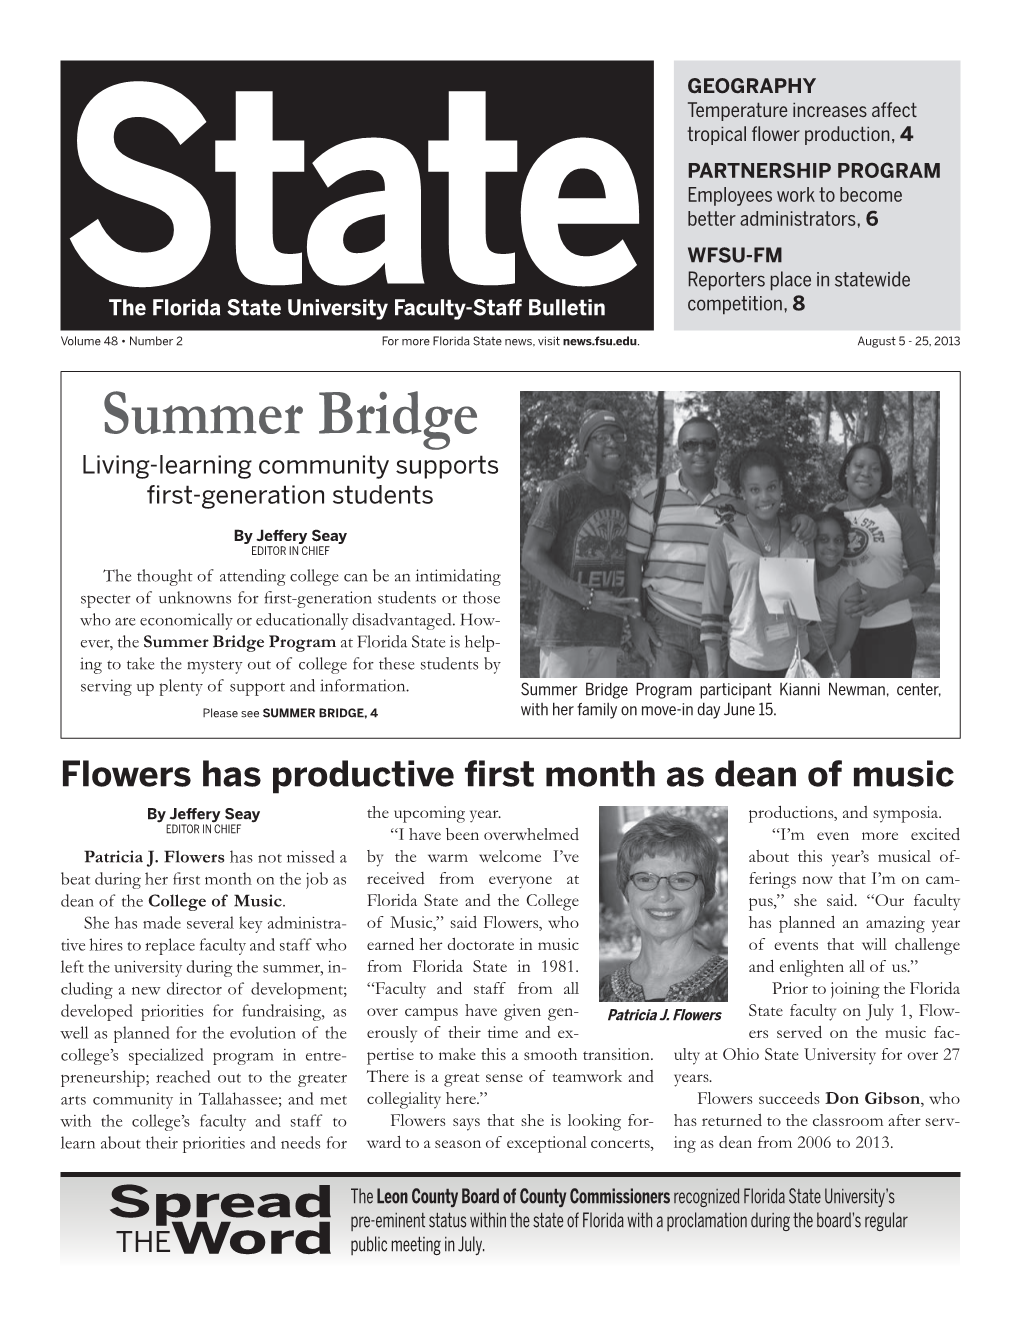 Summer Bridge Living-Learning Community Supports First-Generation Students